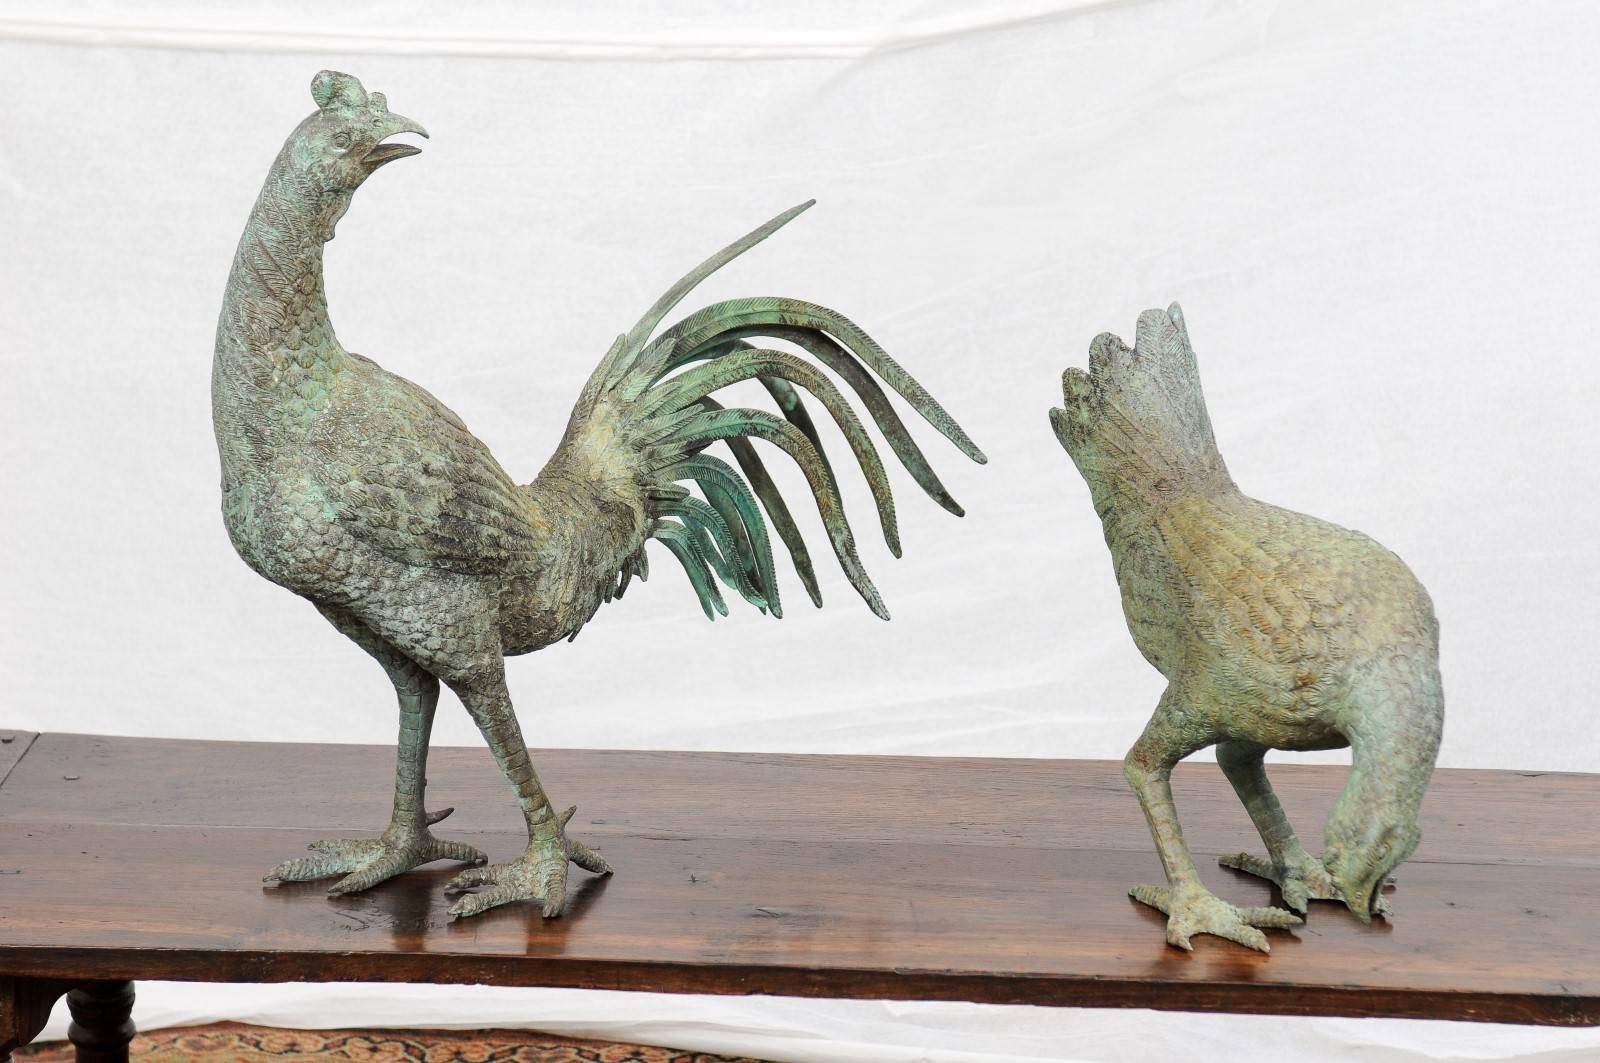 This pair of Italian bronze chicken sculptures (a rooster and a hen) from the mid-20th century is quite stunning. Their large size (the tallest one is 20.75